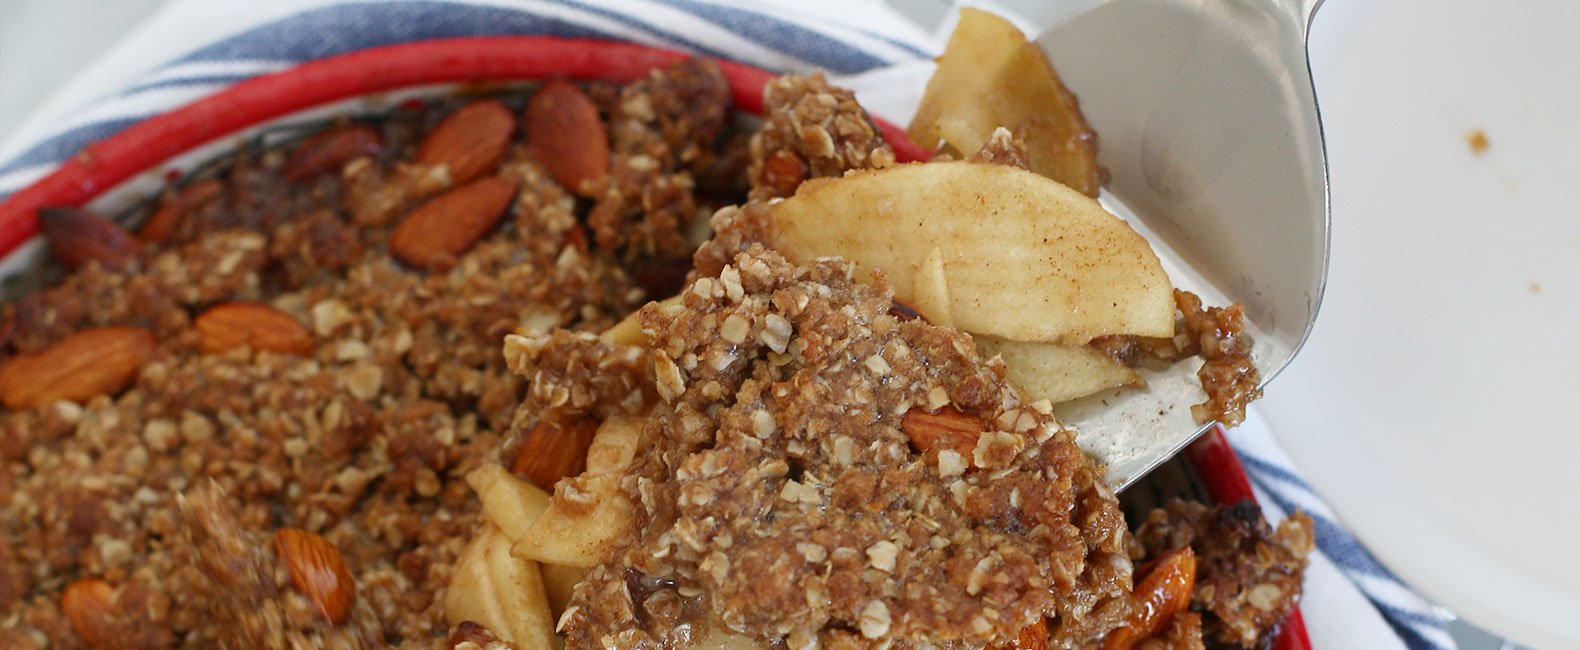 Apple Crisp with Oatmeal Topping Recipe | Quaker Oats